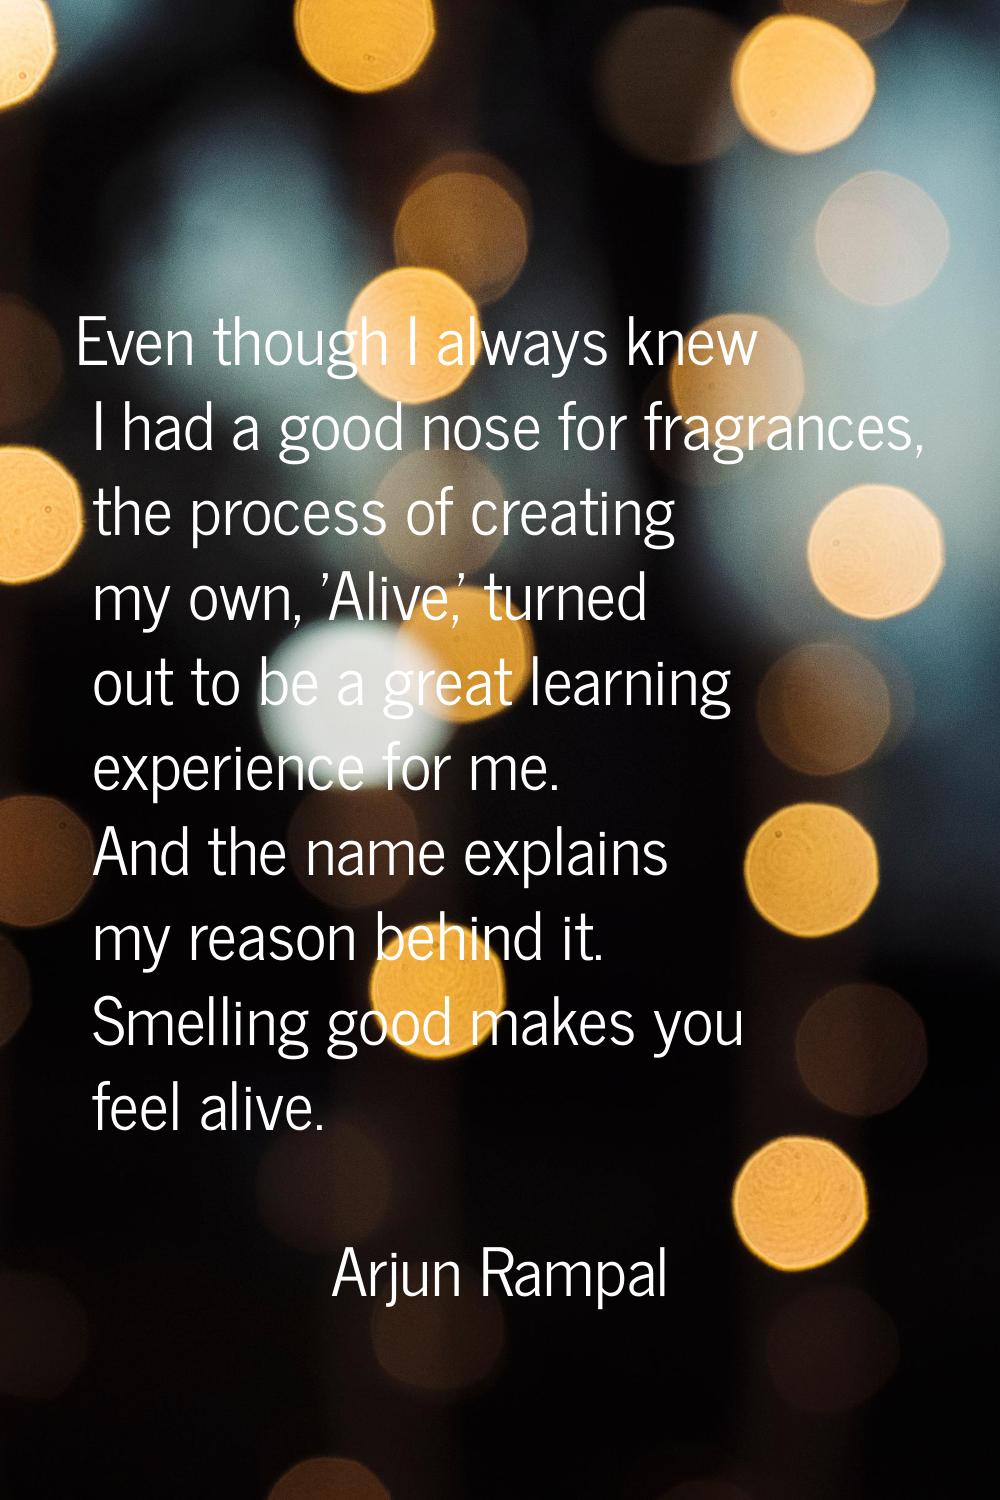 Even though I always knew I had a good nose for fragrances, the process of creating my own, 'Alive,